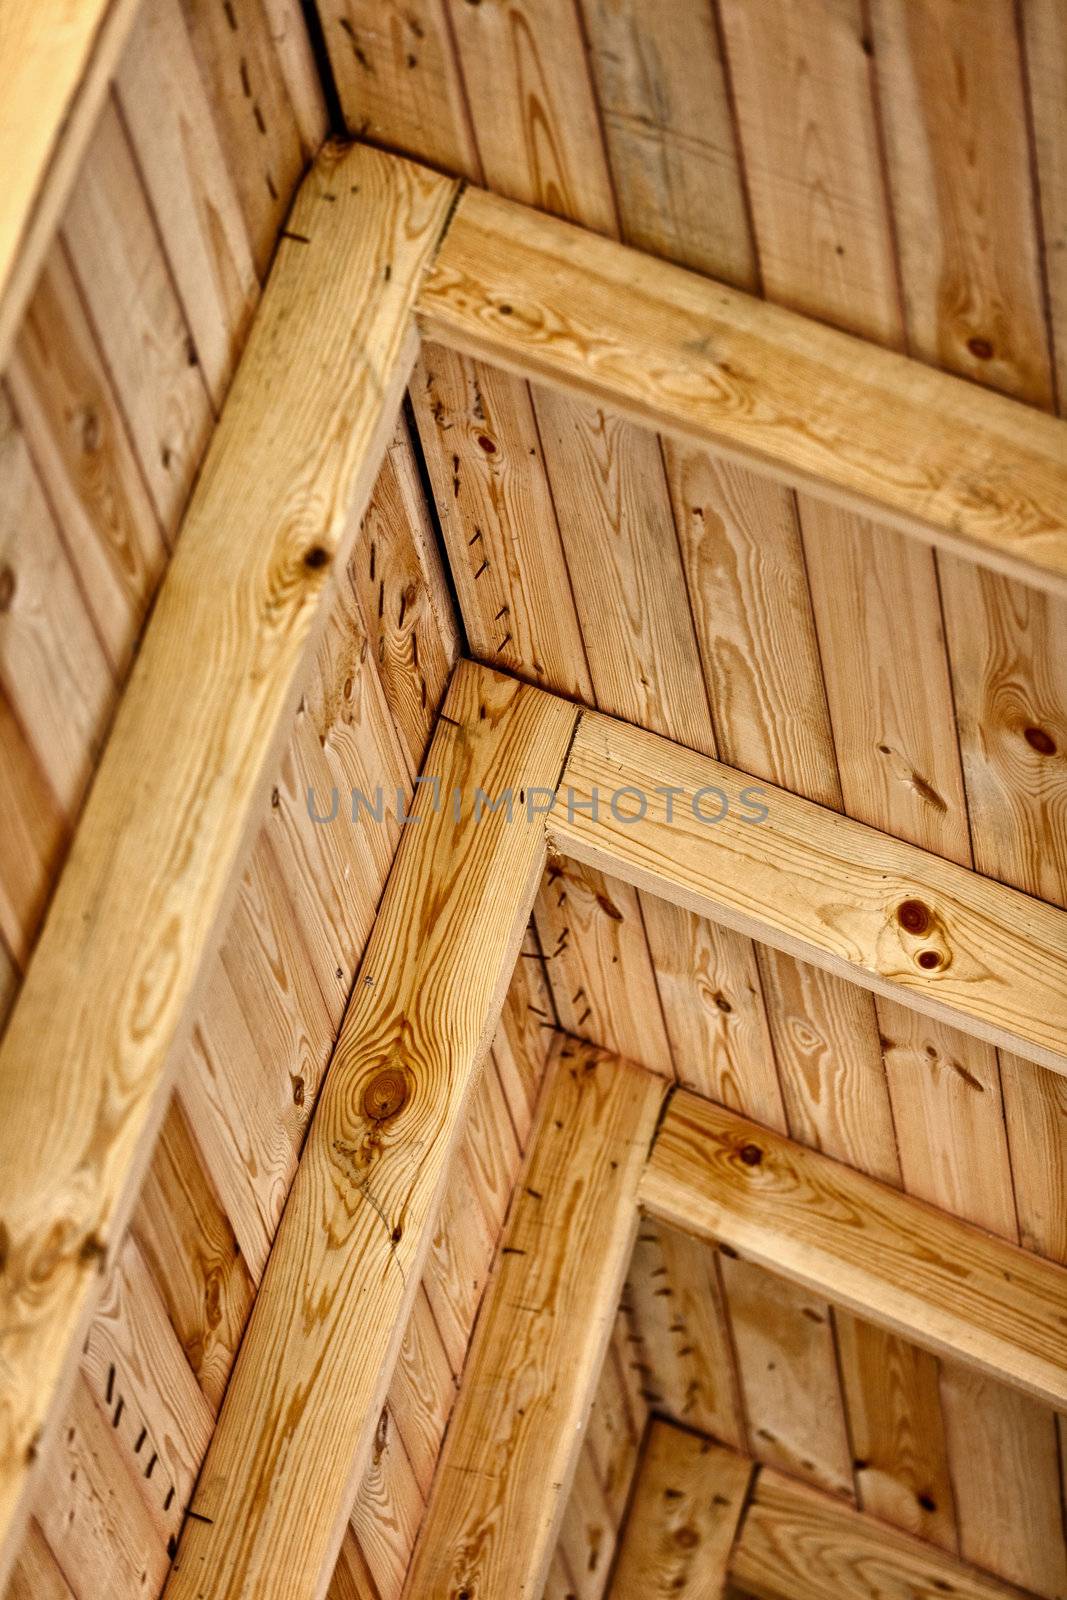 Construction a wooden roof - inside view by pzaxe